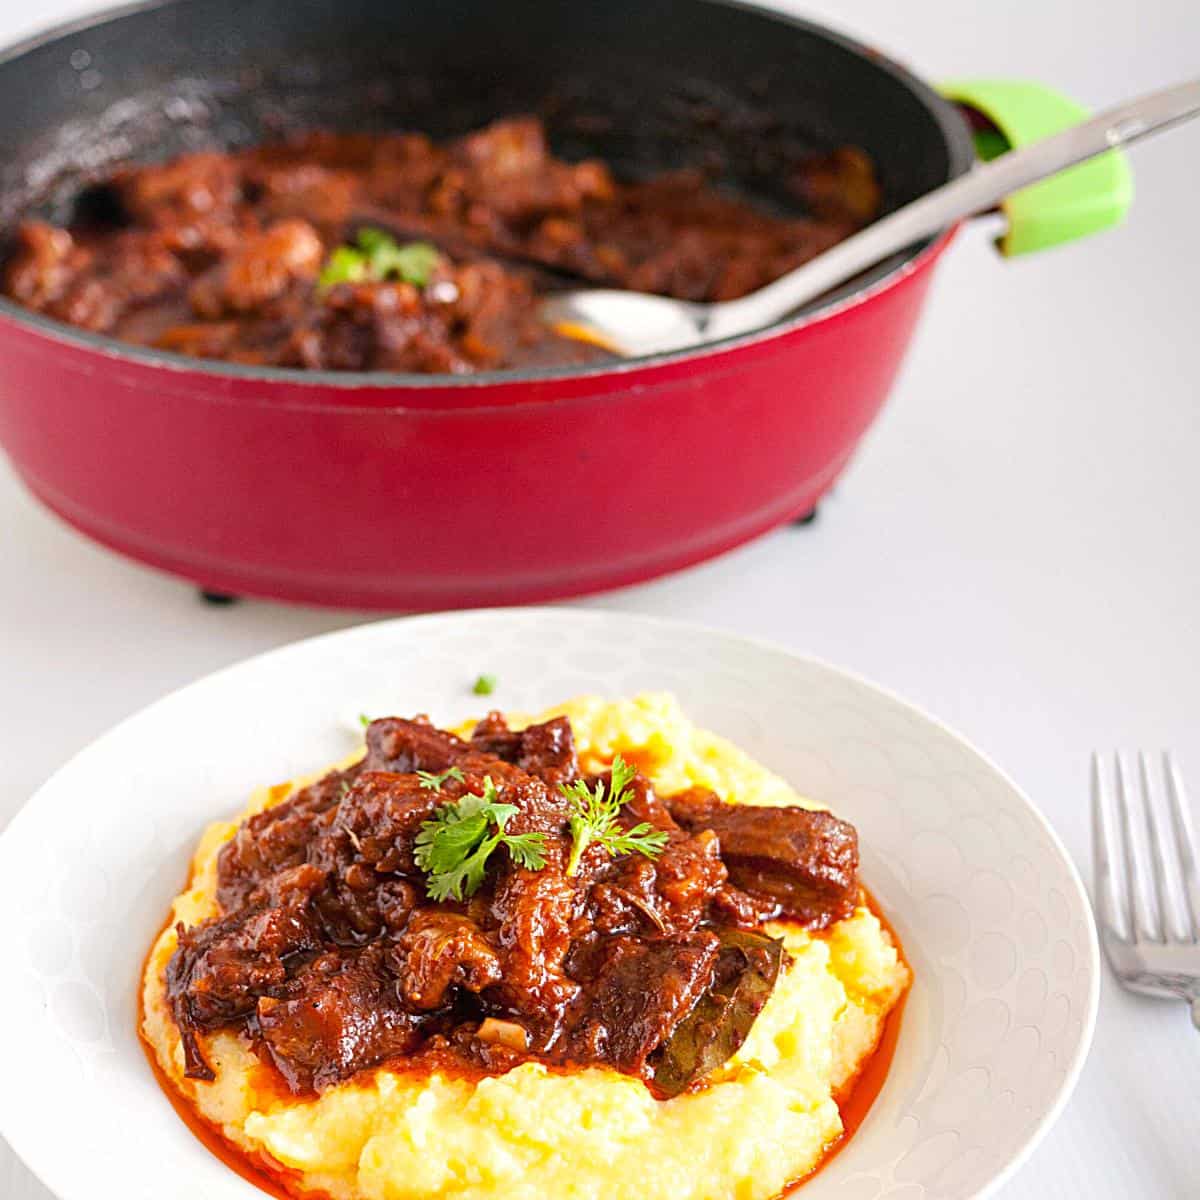 Ragu with lamb on a plate with polenta.